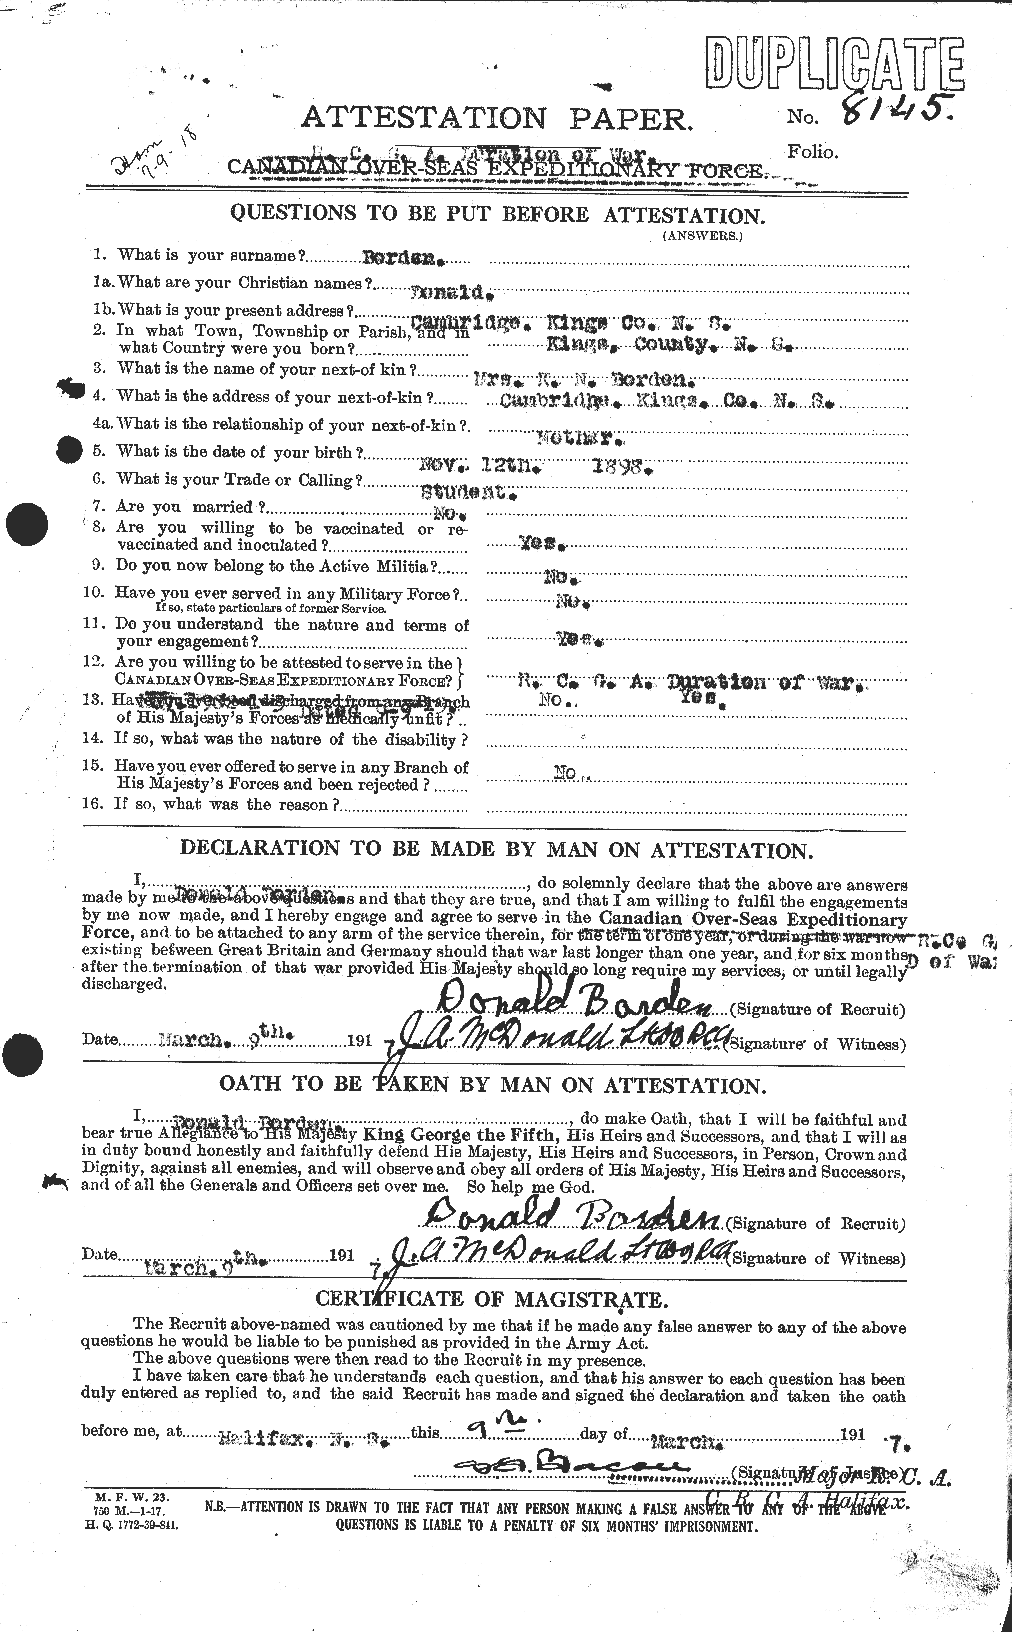 Personnel Records of the First World War - CEF 252288a